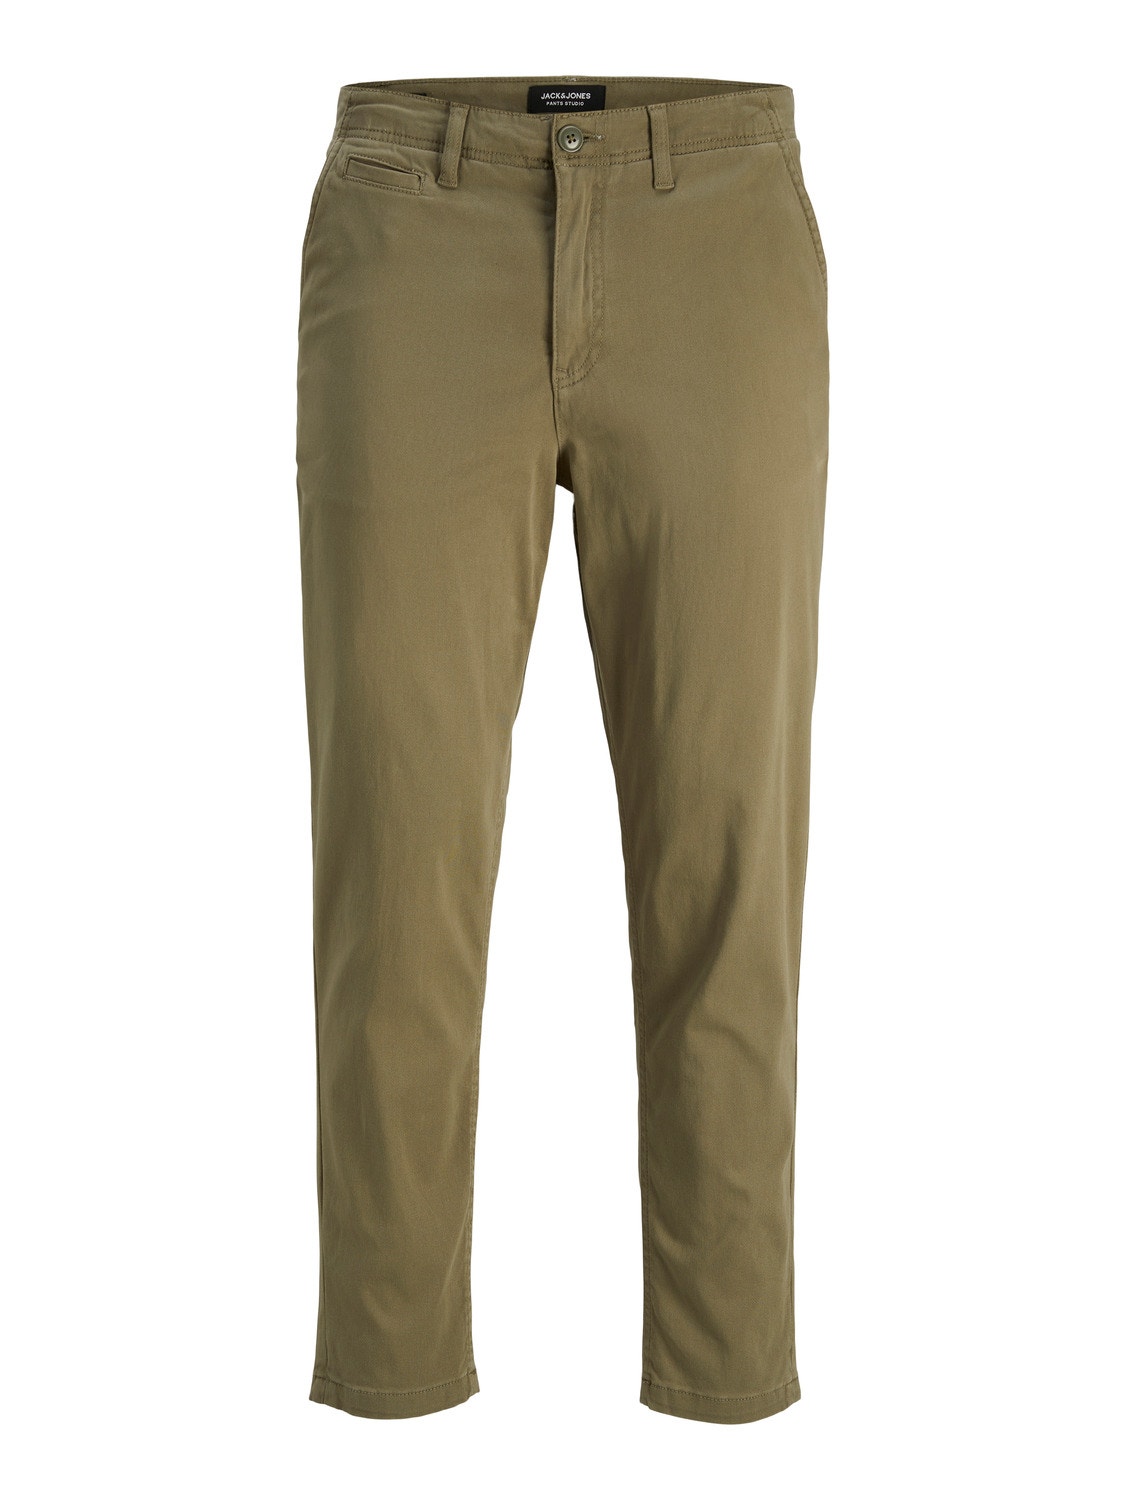 Jack & Jones Tapered Fit Chino Hose -Dusty Olive - 12242188